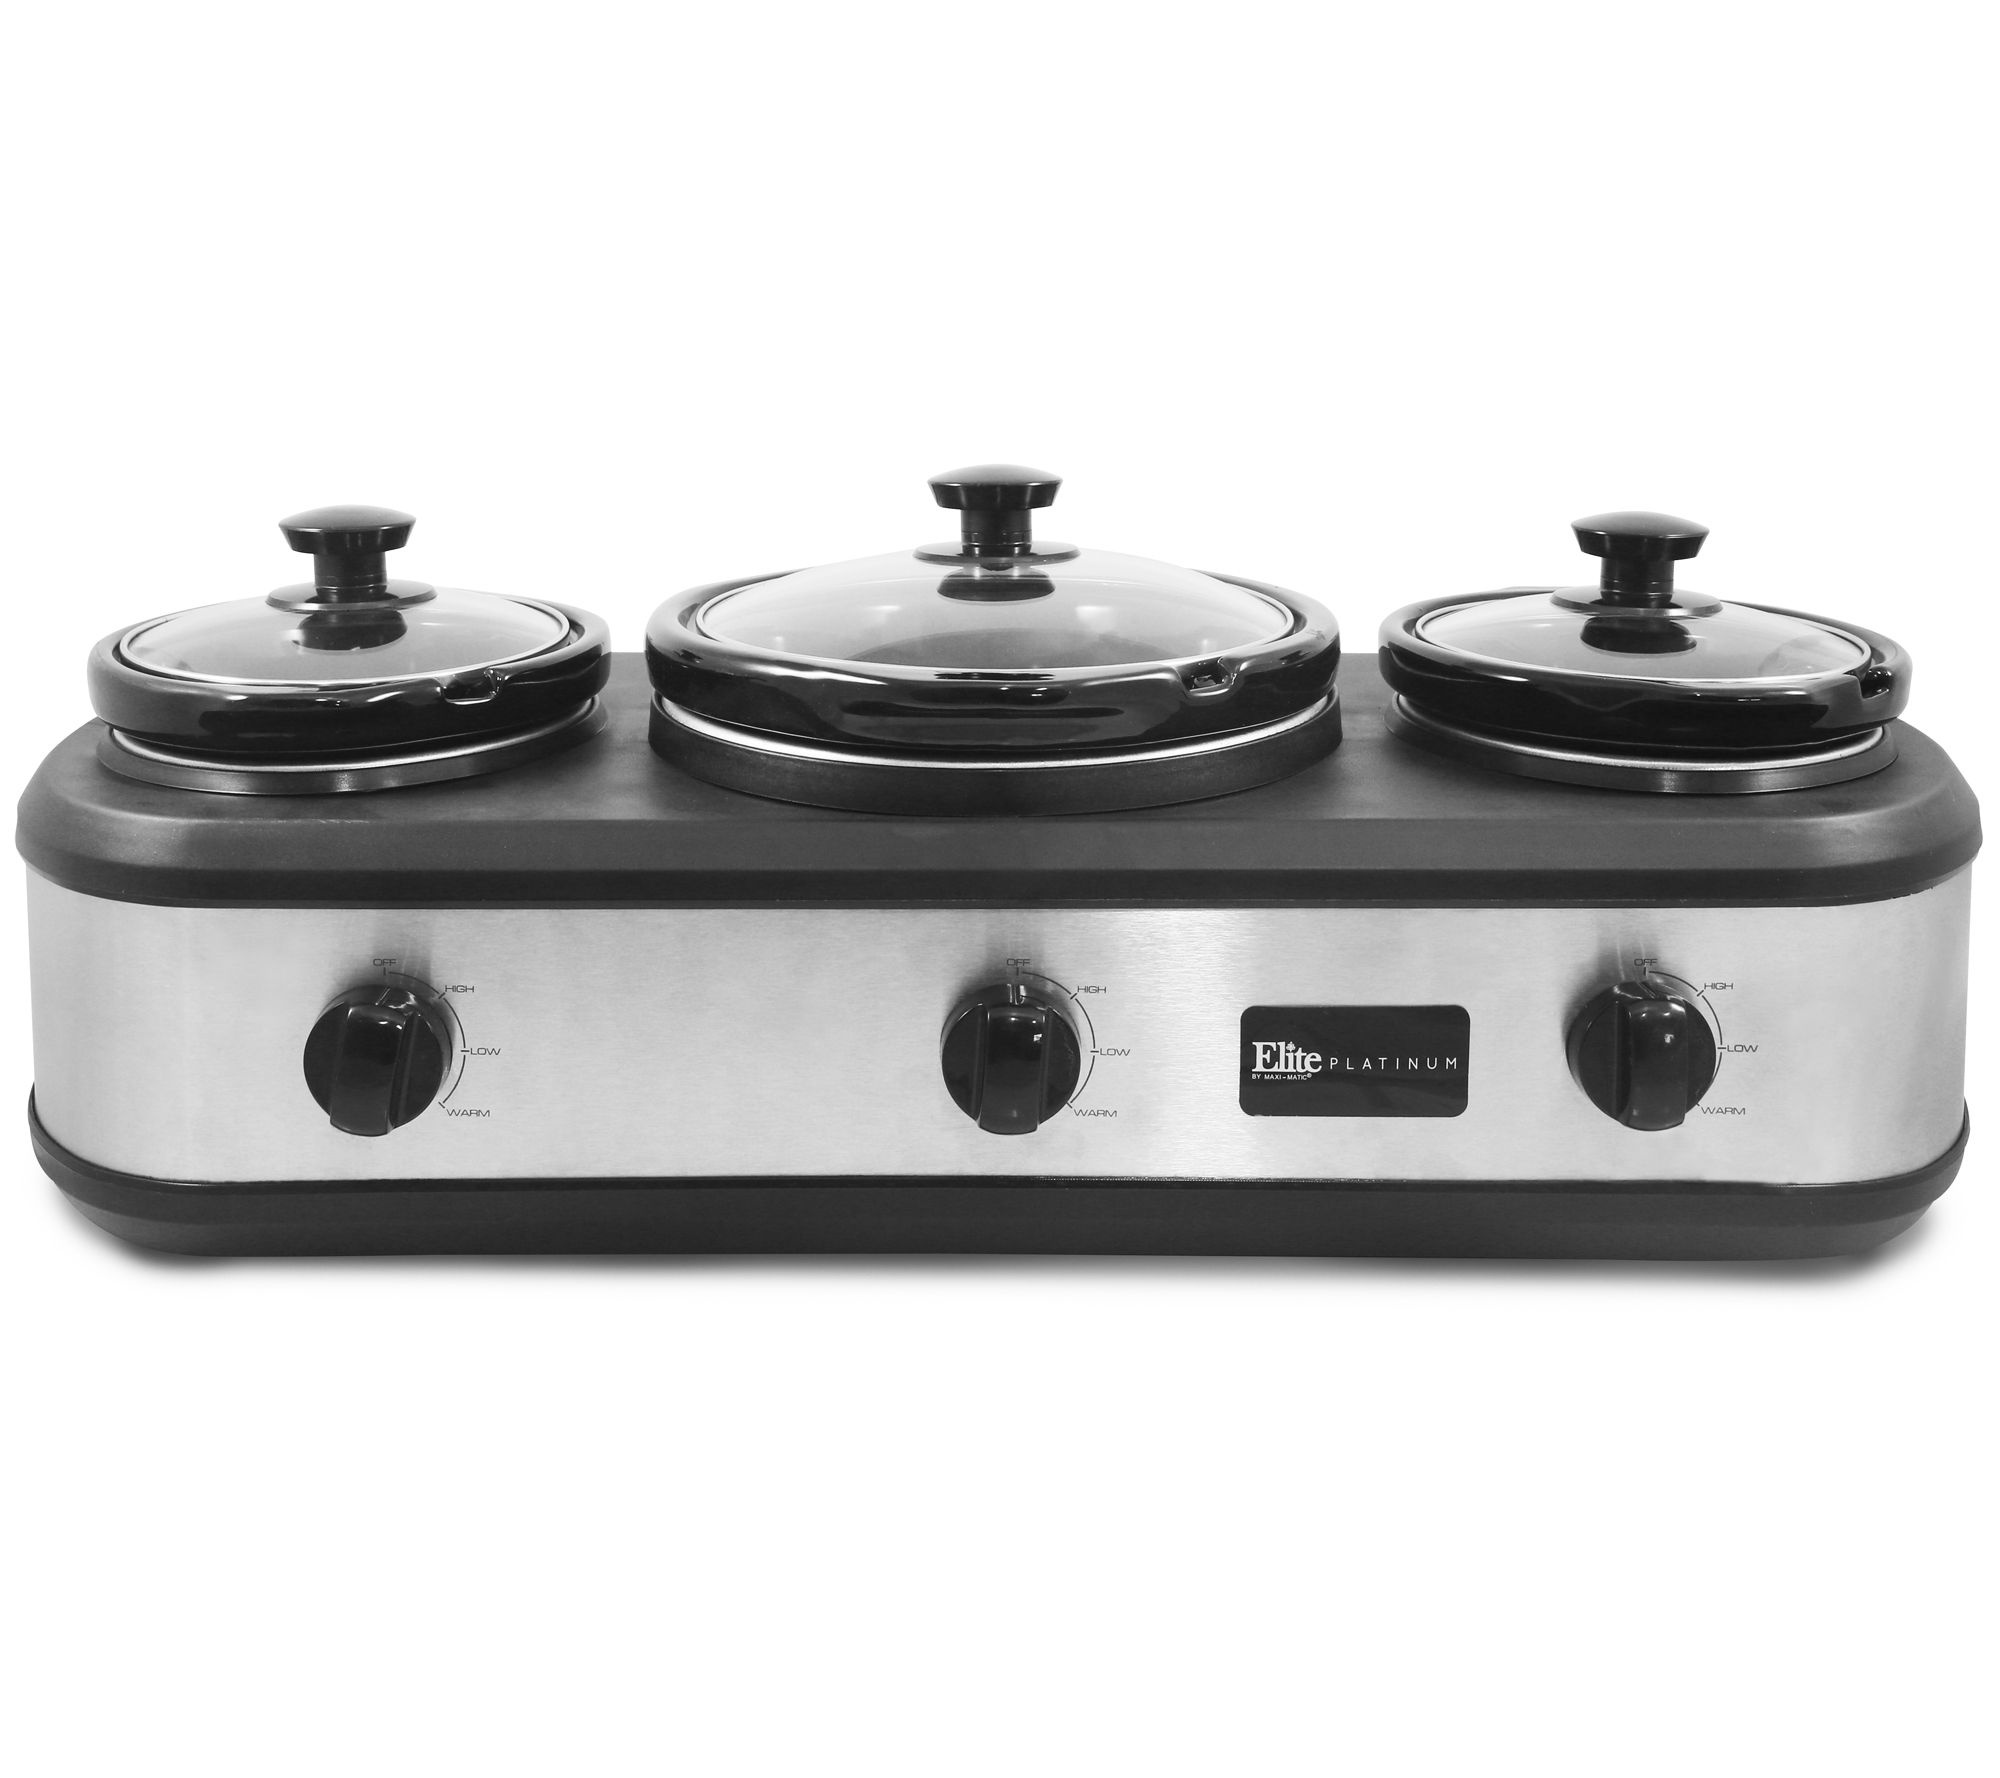 Courant 5 qt. (2.5 Qt.) Each Double Slow Cooker - Stainless Steel, Silver